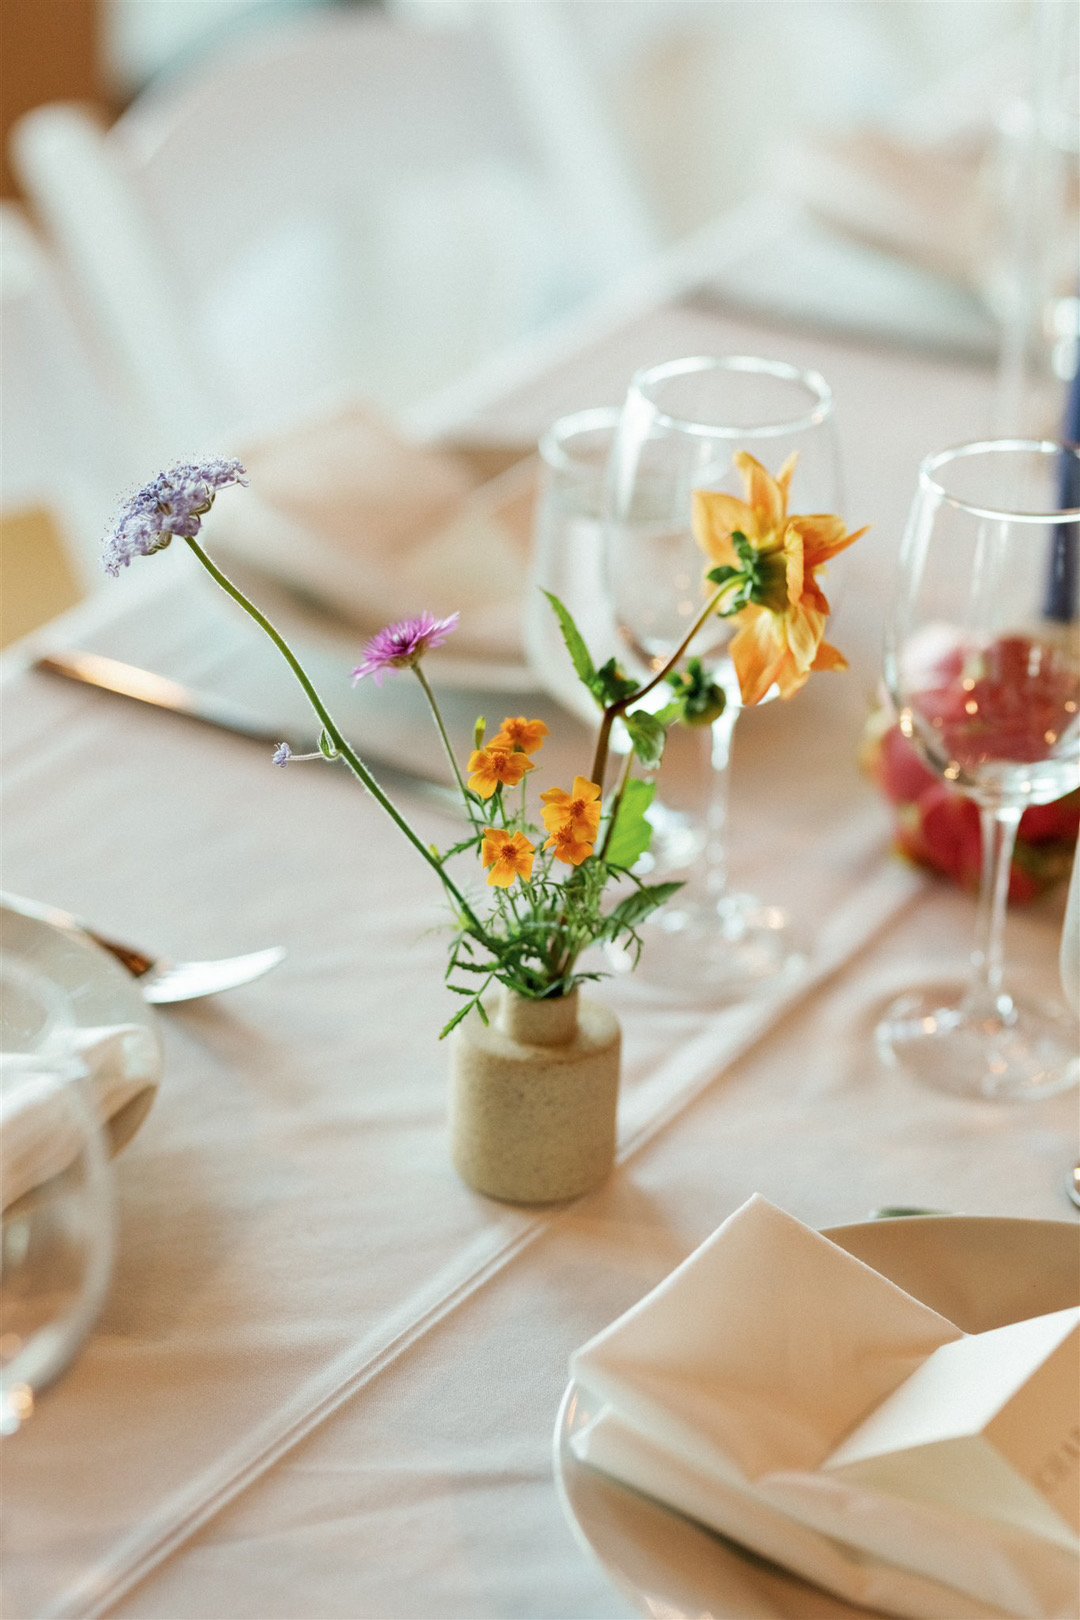 keep floral_vancouver island florist_farm to table flowers_ethical florals_discover our services_gallery 04.JPG